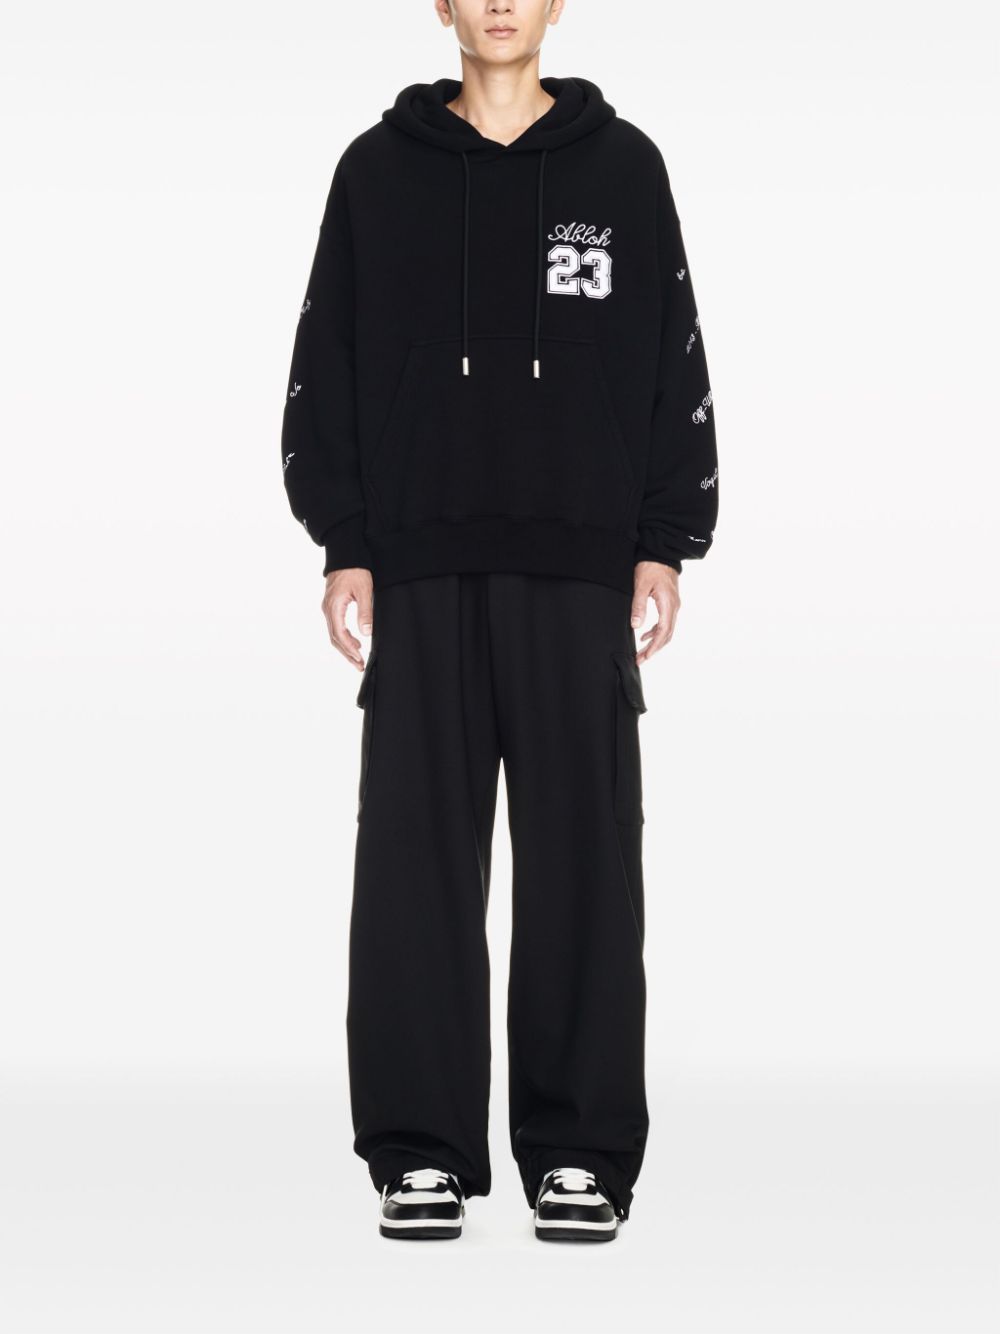 Shop Off-white Black Cotton Hoodie With Mj 23 Patch